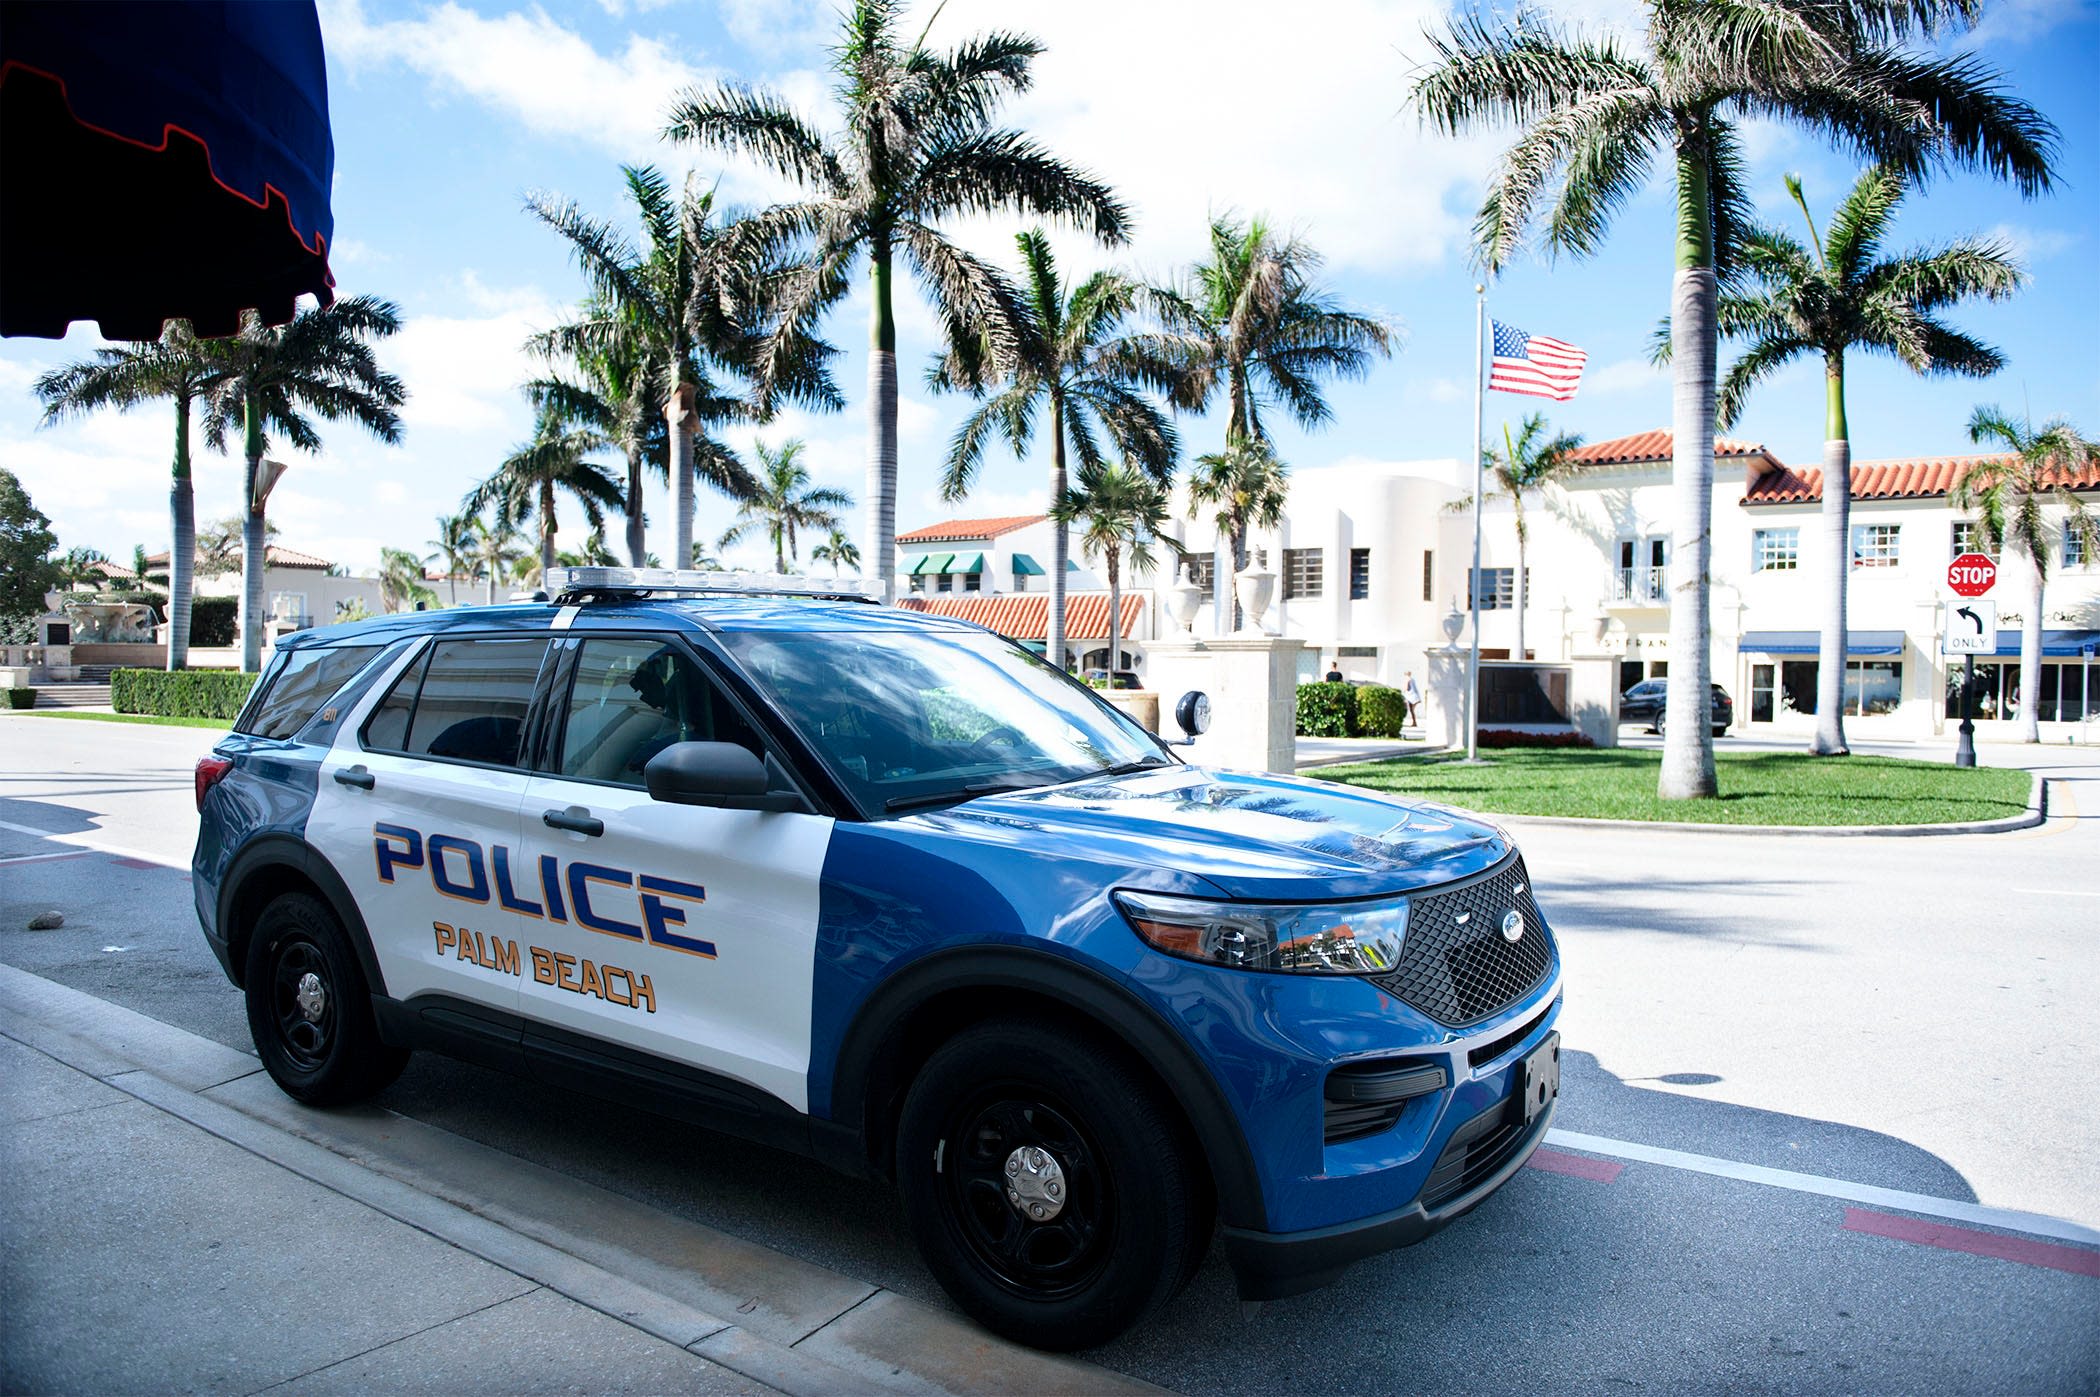 Palm Beach Police: Woman altered $152,000 check, deposited it into her account